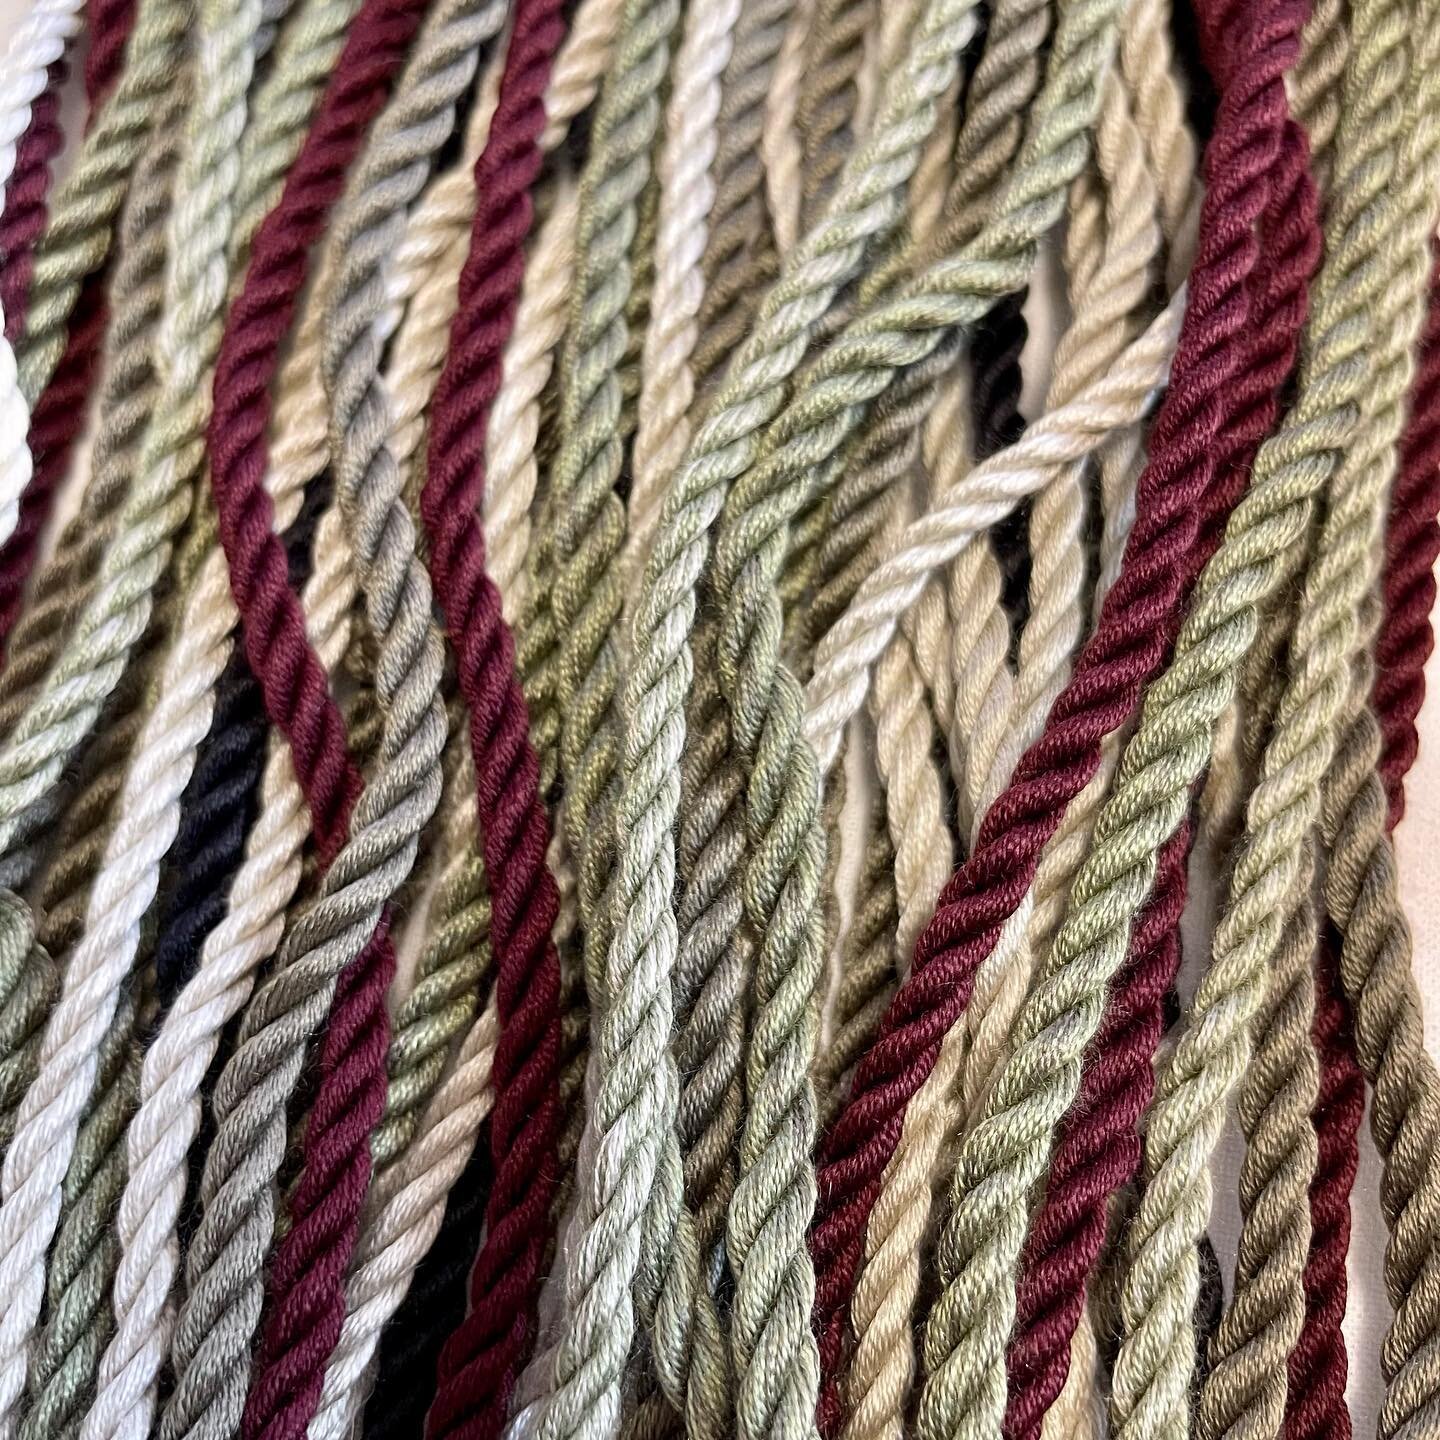 Inspired by the winter garden I&rsquo;ve been busy in the studio spinning cords for new art pieces

Each of these cords is made up of 120 very fine silk threads which have to be organised into groups and then spun under tension so that I can weave th